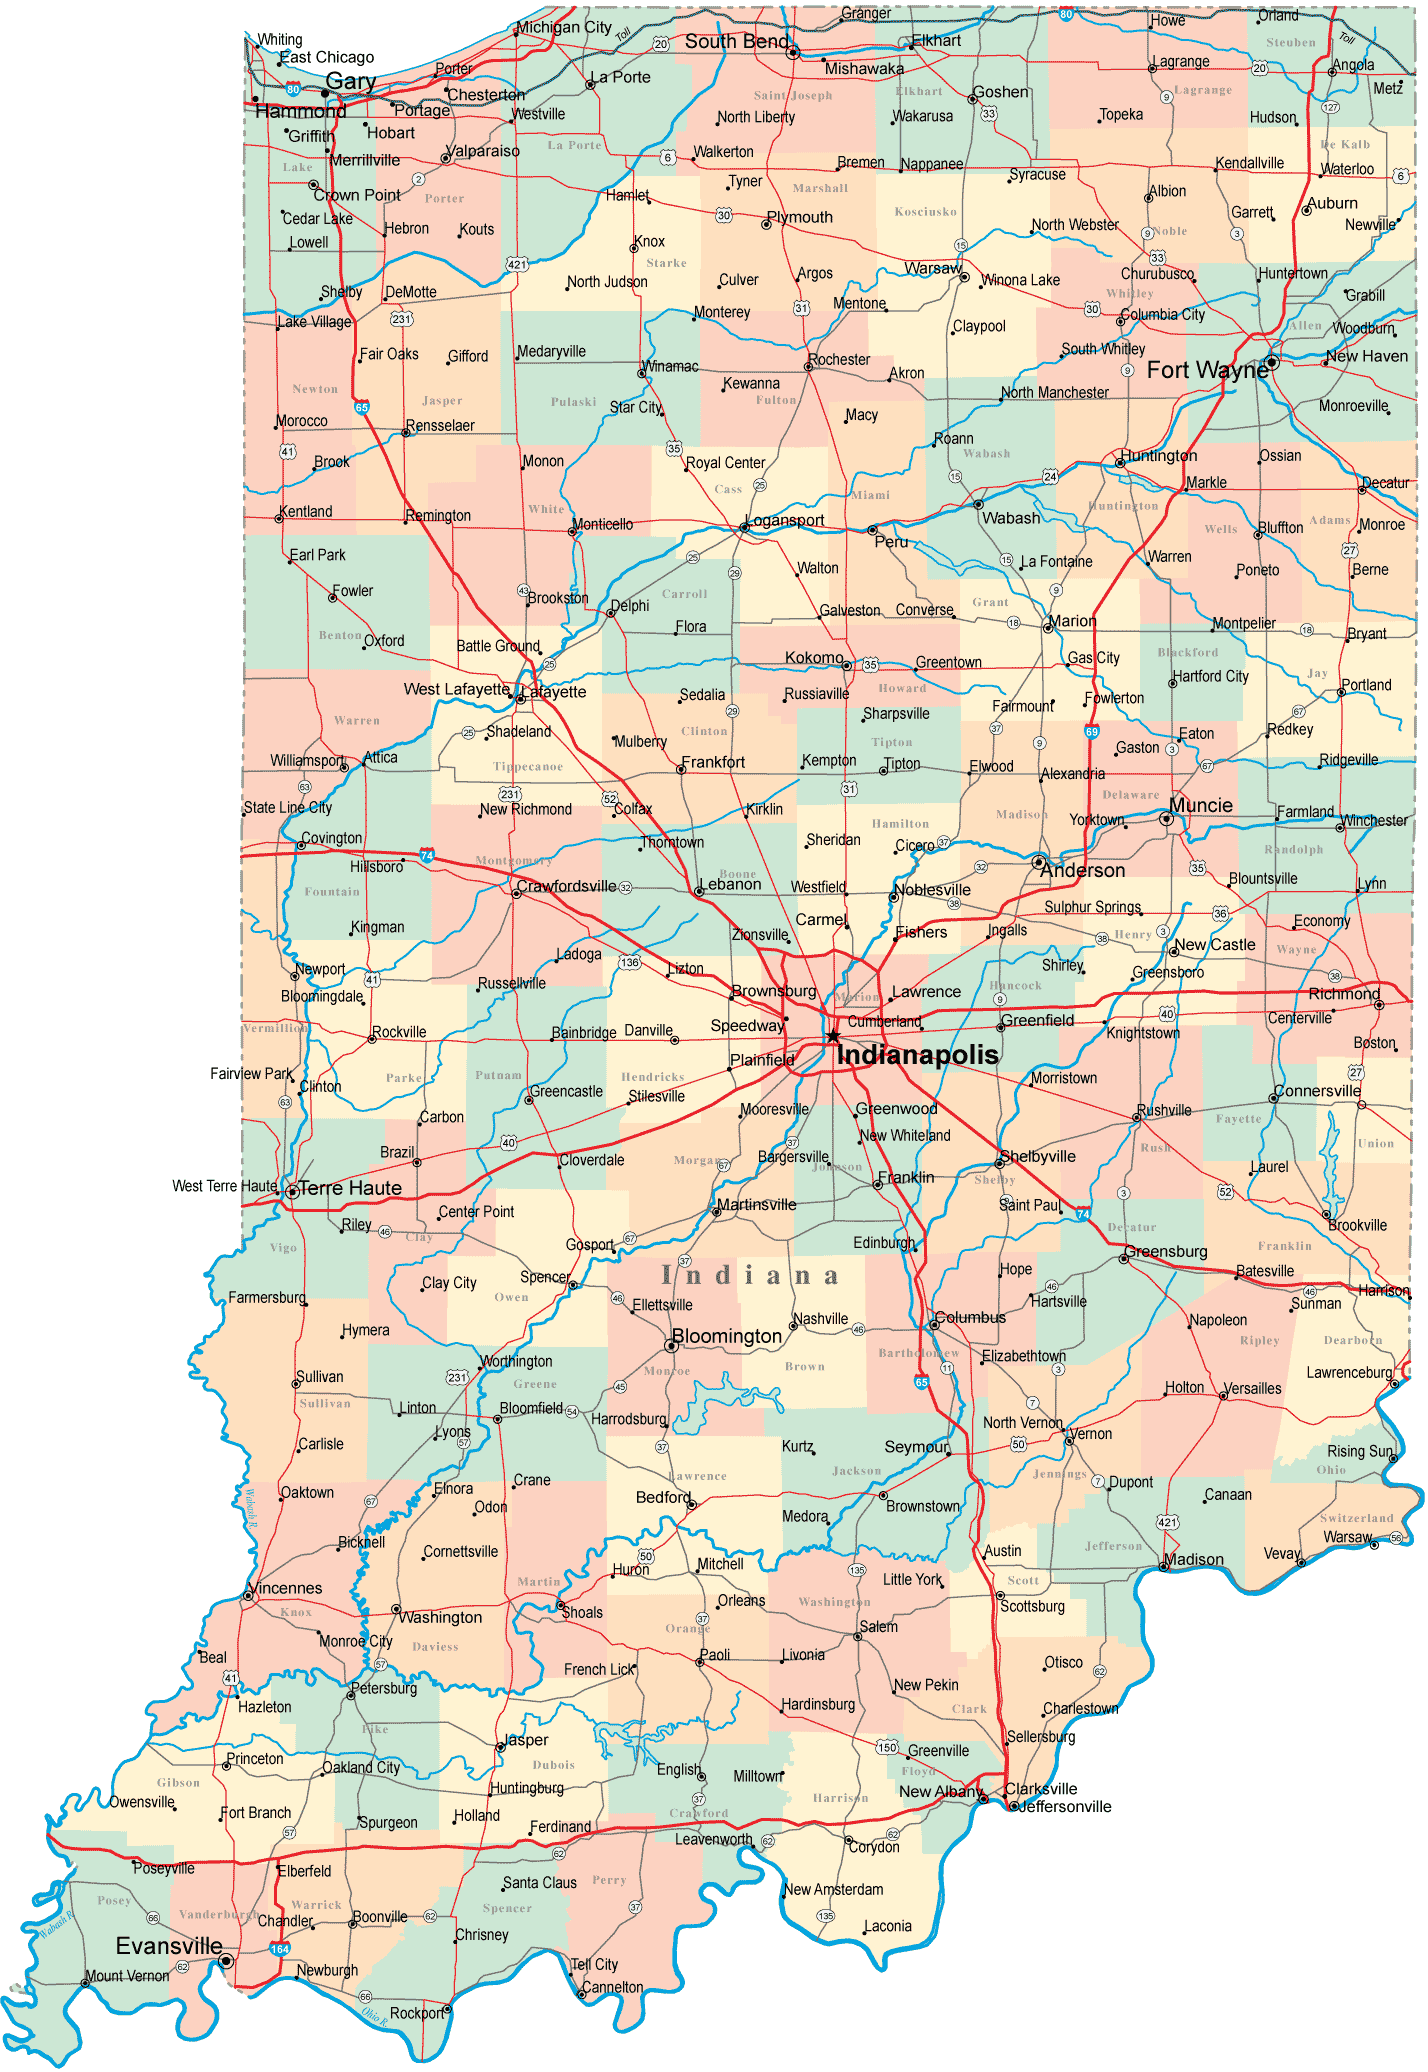 Southern Indiana Map With Cities Indiana Road Map   IN Road Map   Indiana Highway Map